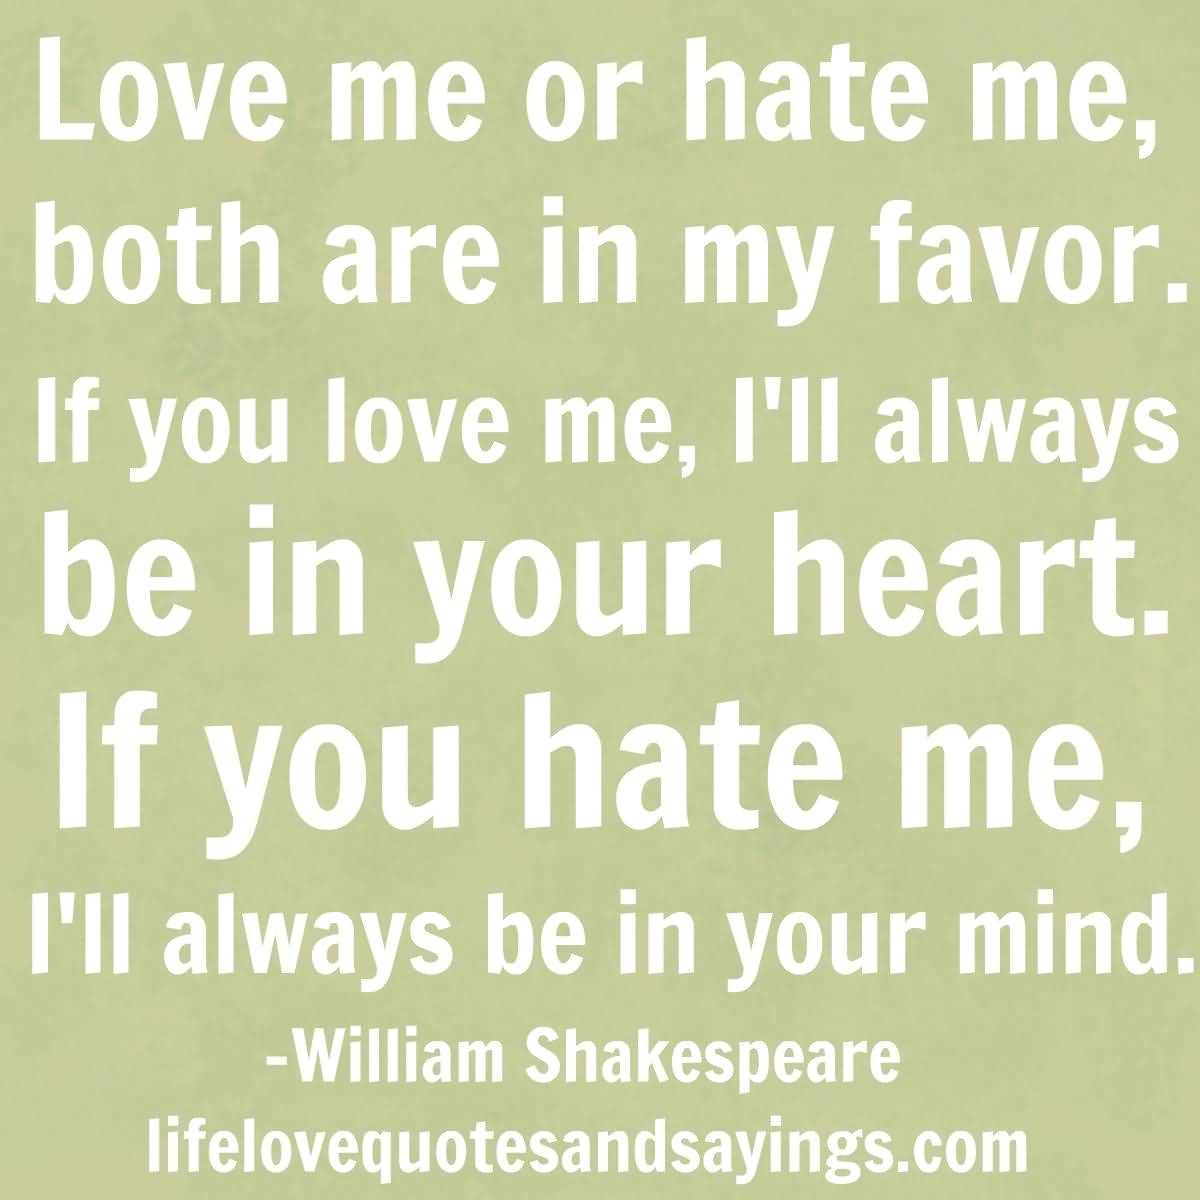 Love me or hate me, both are in my favor...If you love me, I'll always be in your heart...If you hate me, I'll always be in your mind -  William Shakespeare